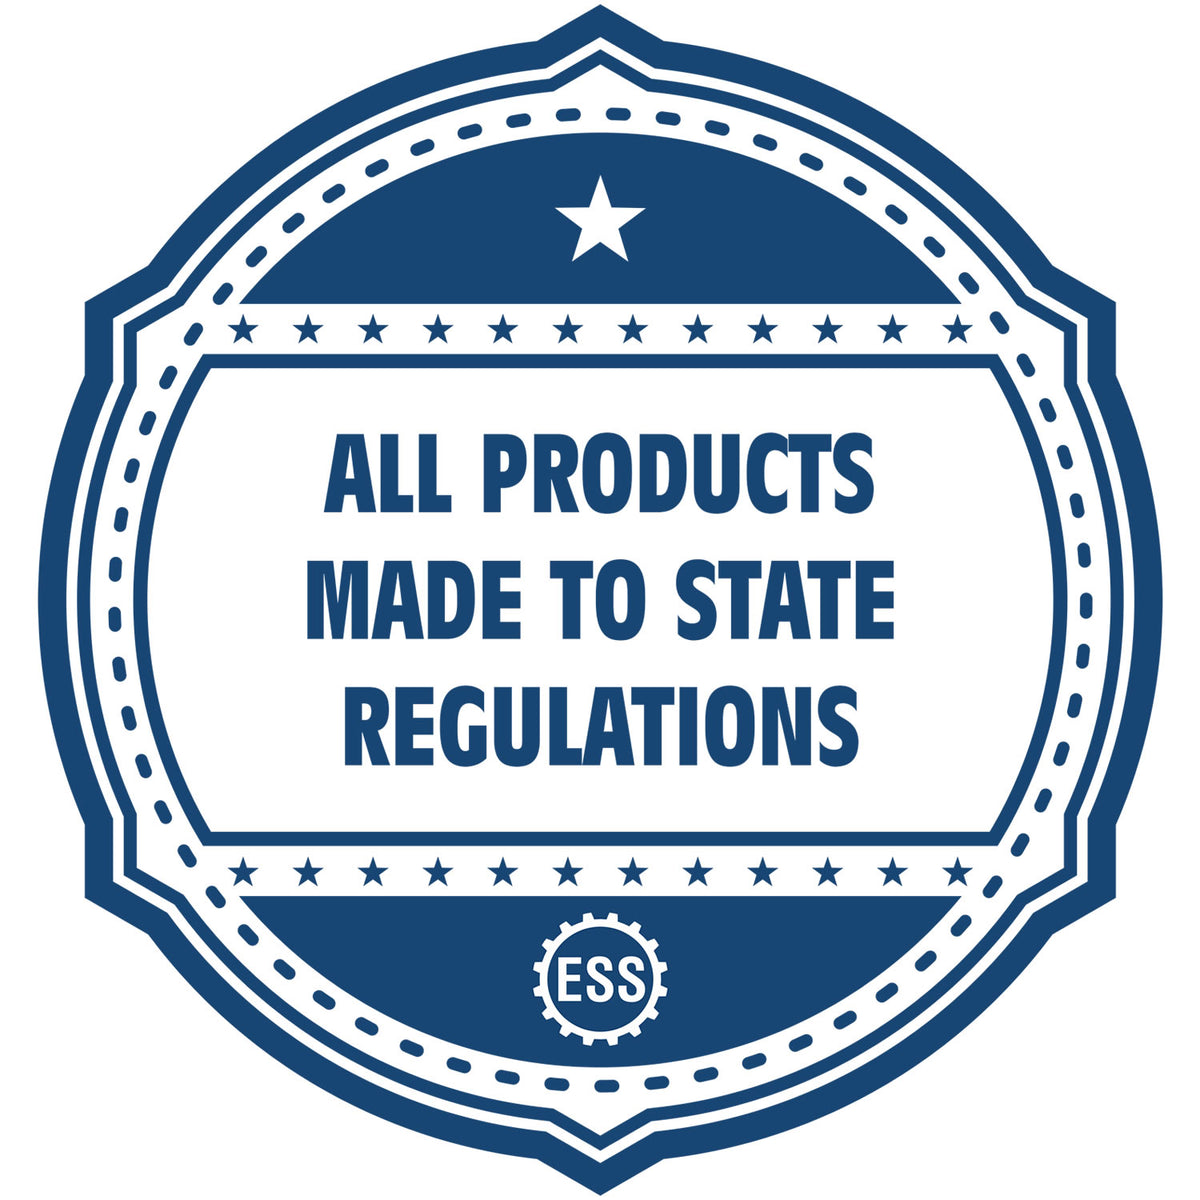 An icon or badge element for the Handheld Kentucky Land Surveyor Seal showing that this product is made in compliance with state regulations.